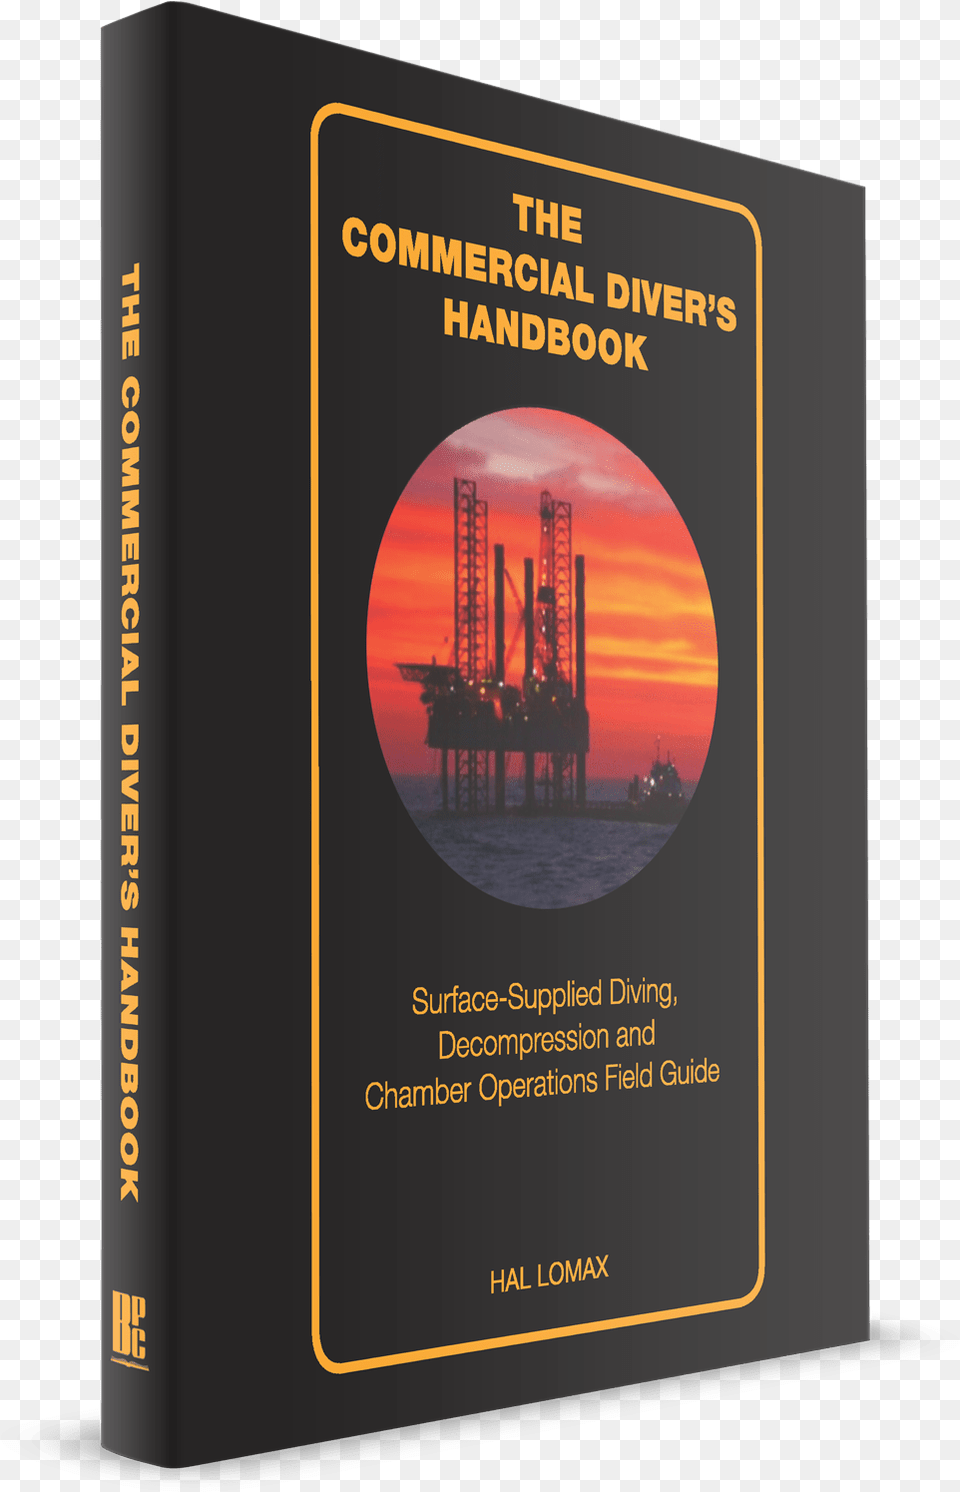 The Commercial Divers Handbook Commercial Diving Books, Book, Publication, Architecture, Building Png